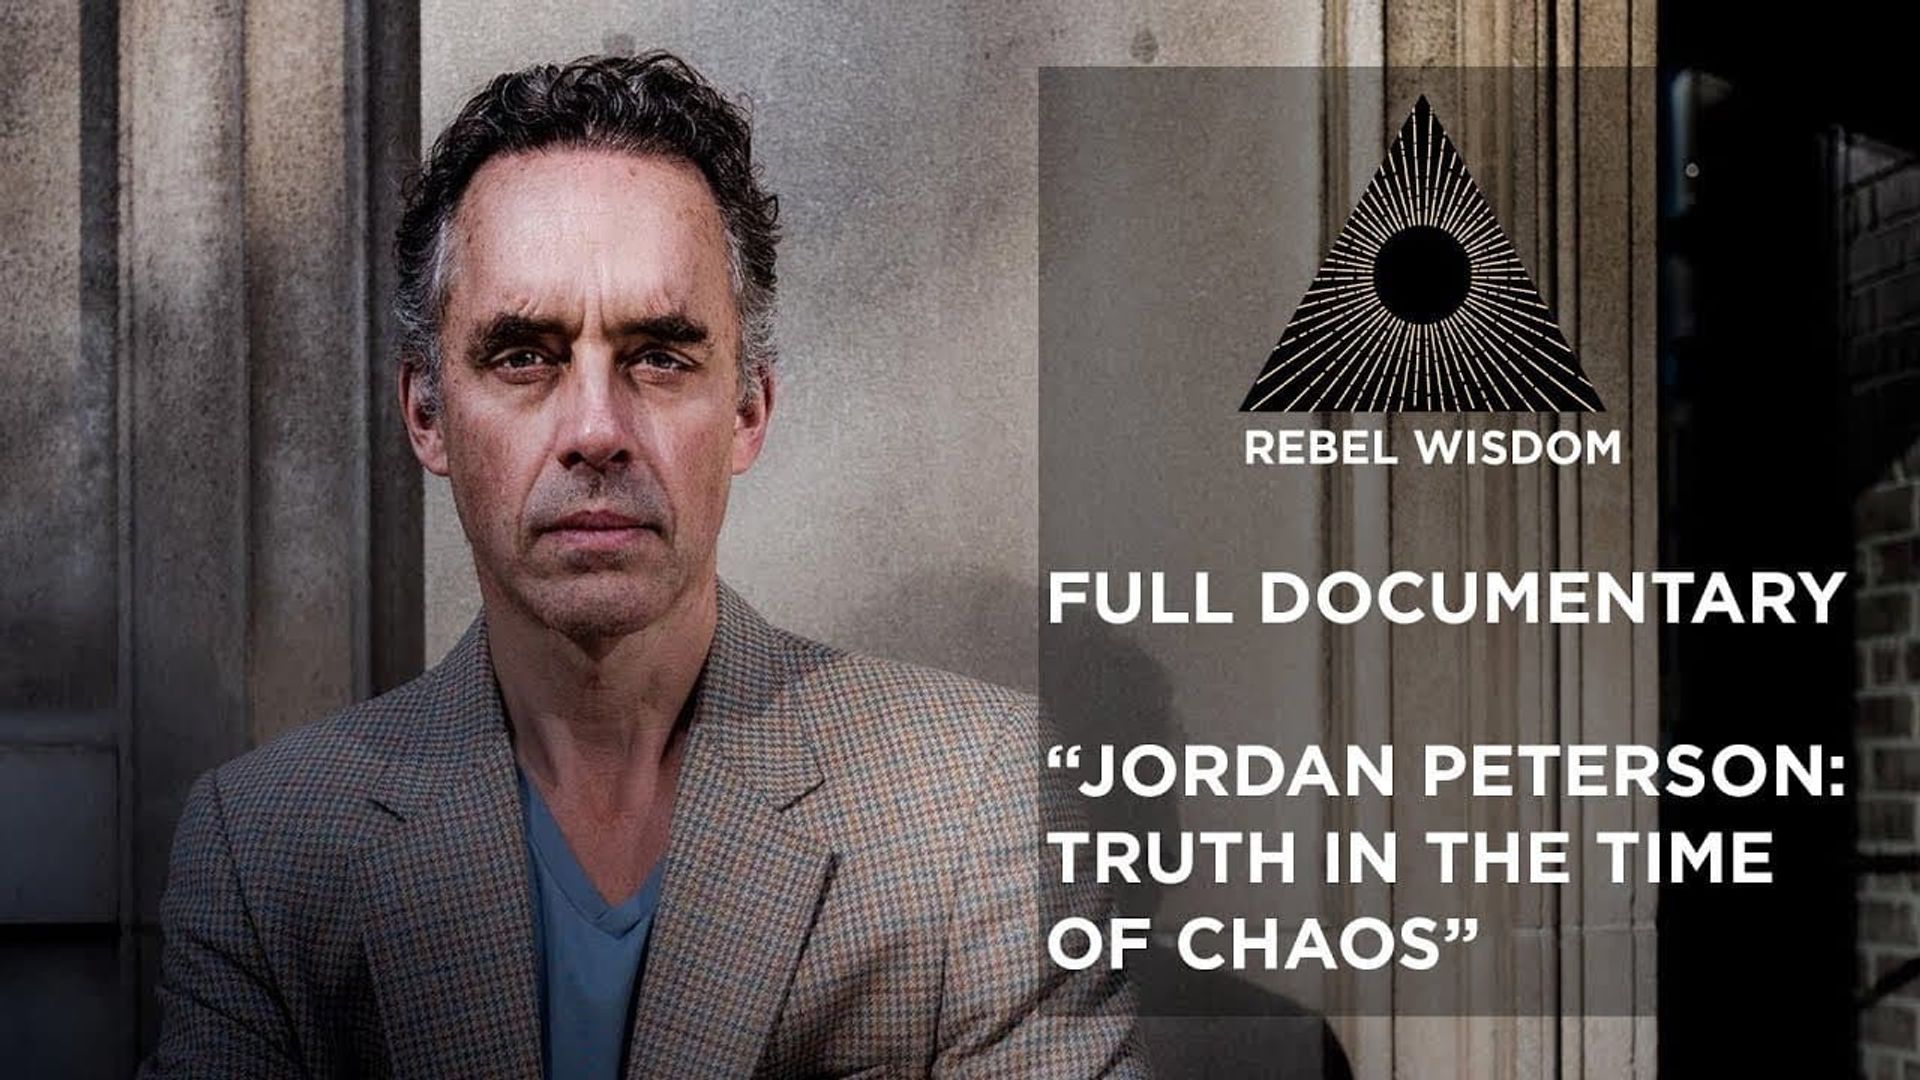 Jordan Peterson: Truth in the Time of Chaos background